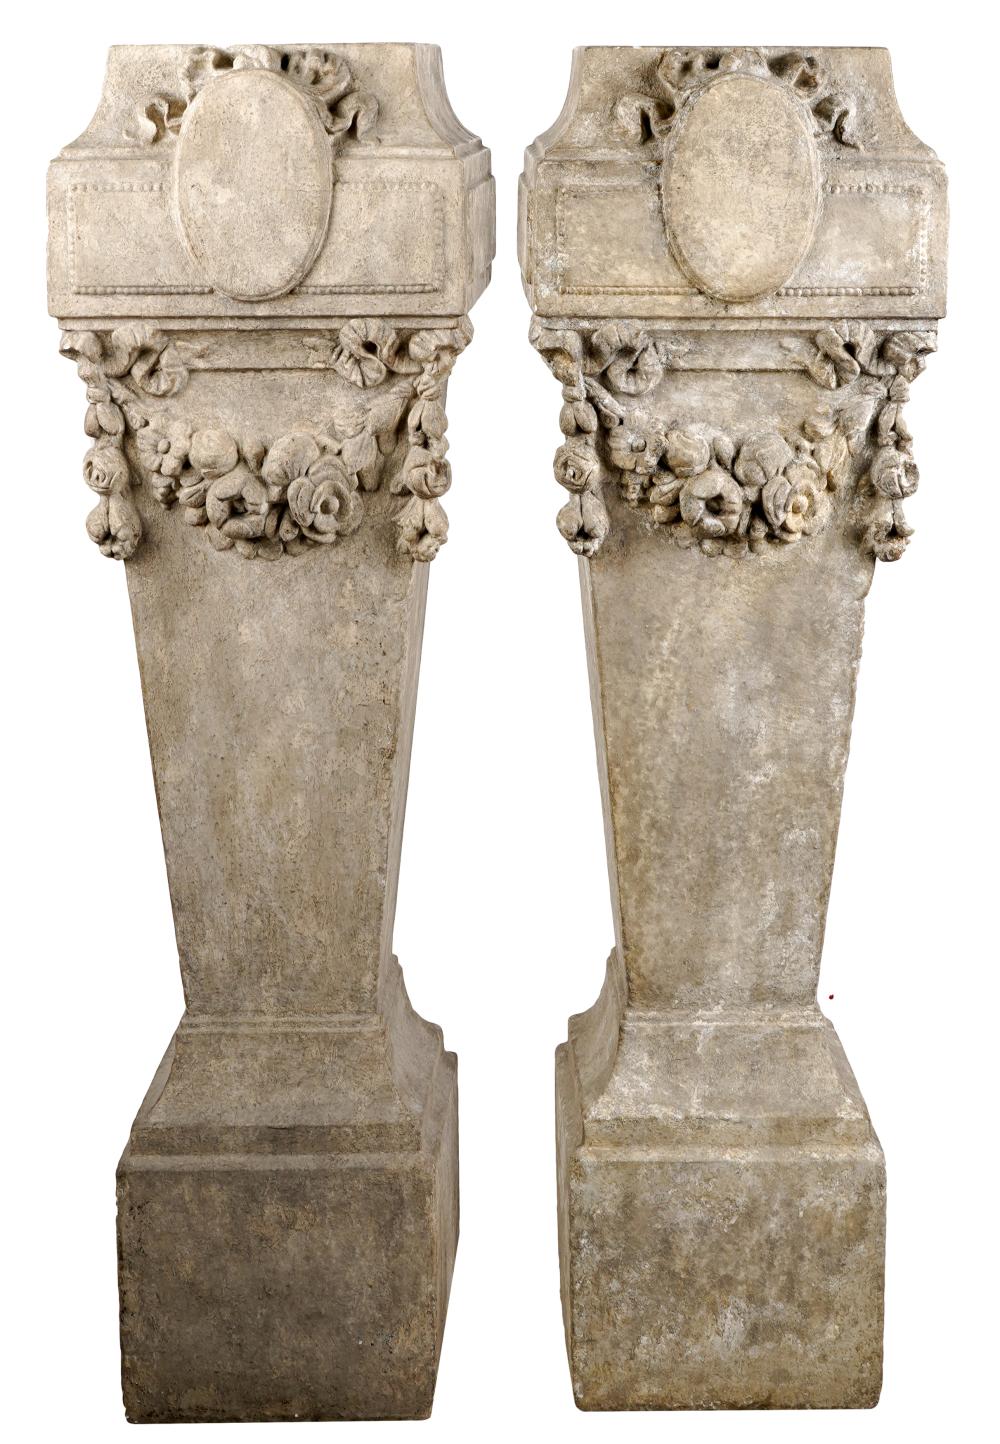 PAIR OF DENNIS & LEEN NEOCLASSICAL-STYLE